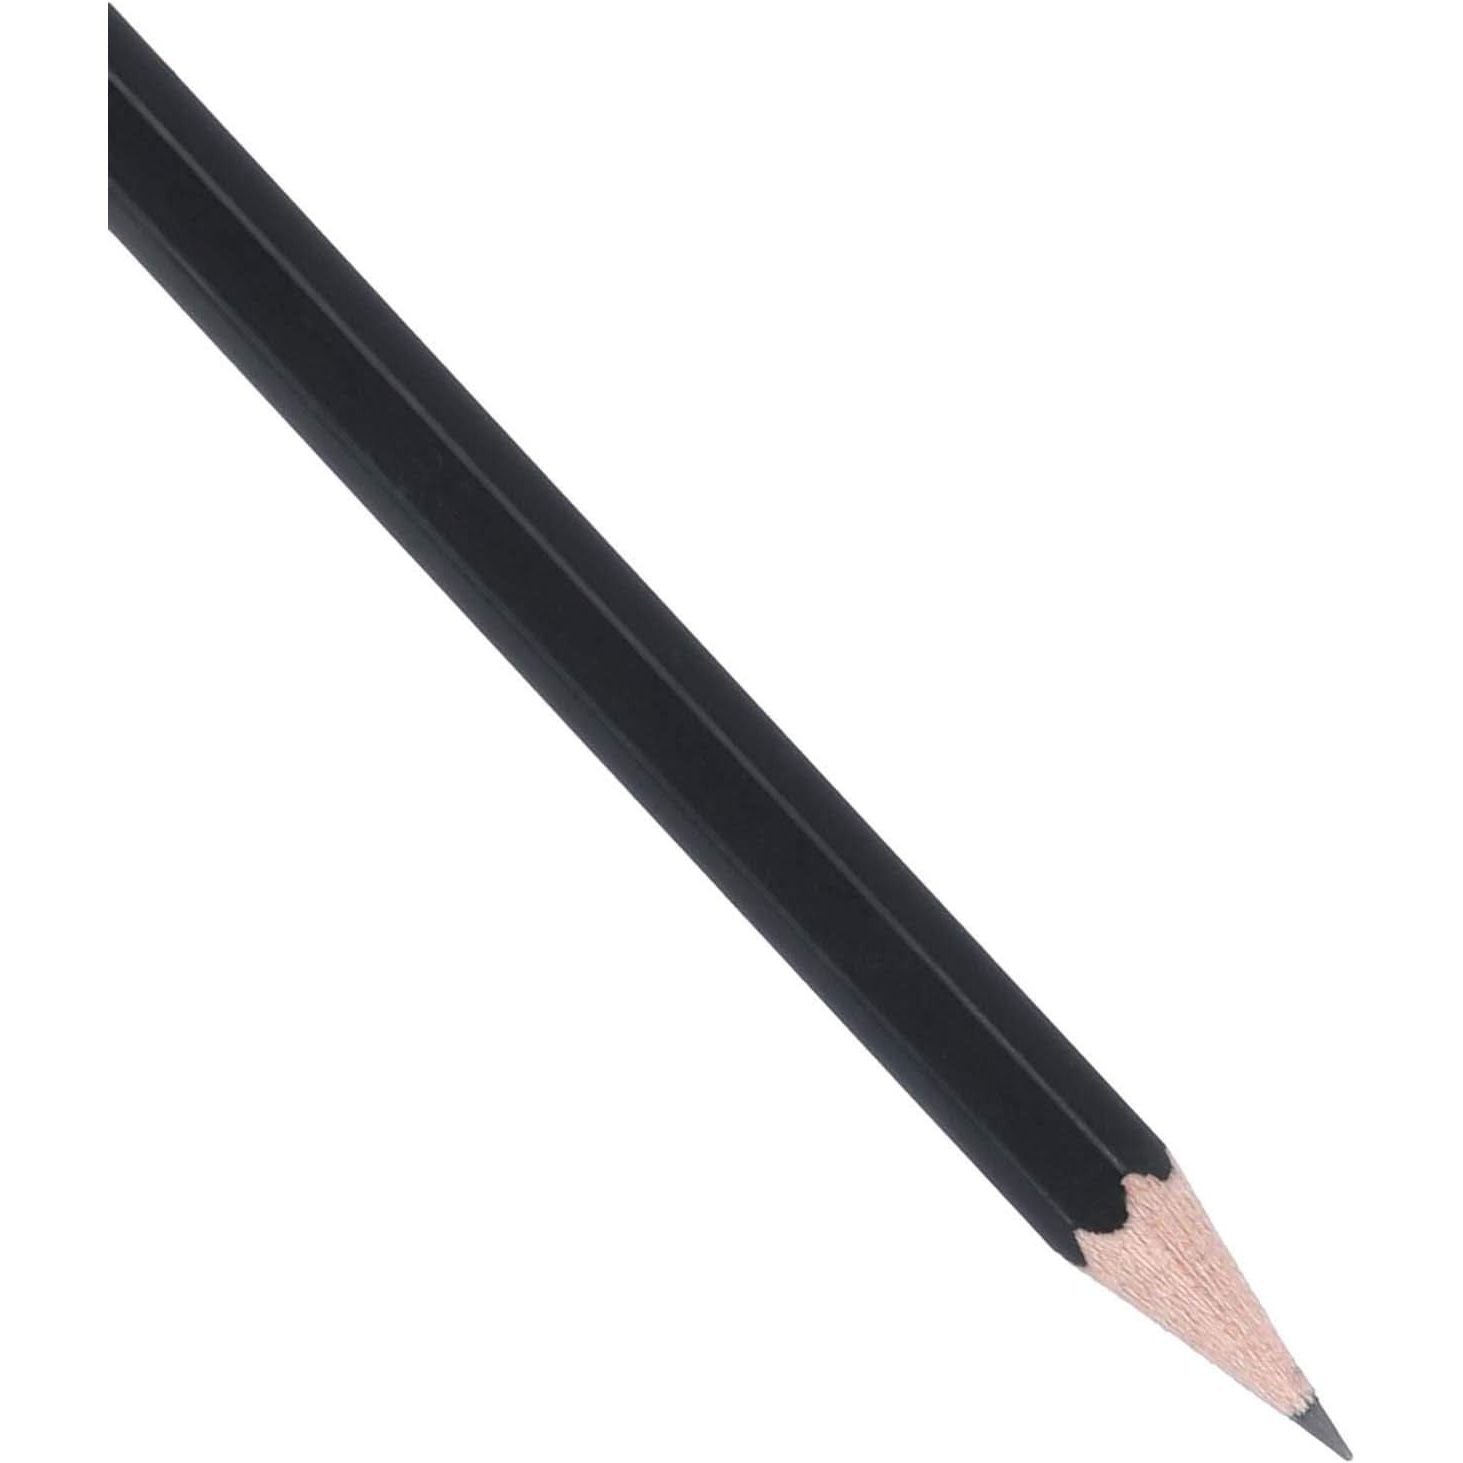 Faber-Castell Blacklead Pencils 2B Tip 2122 (Pack of 12)